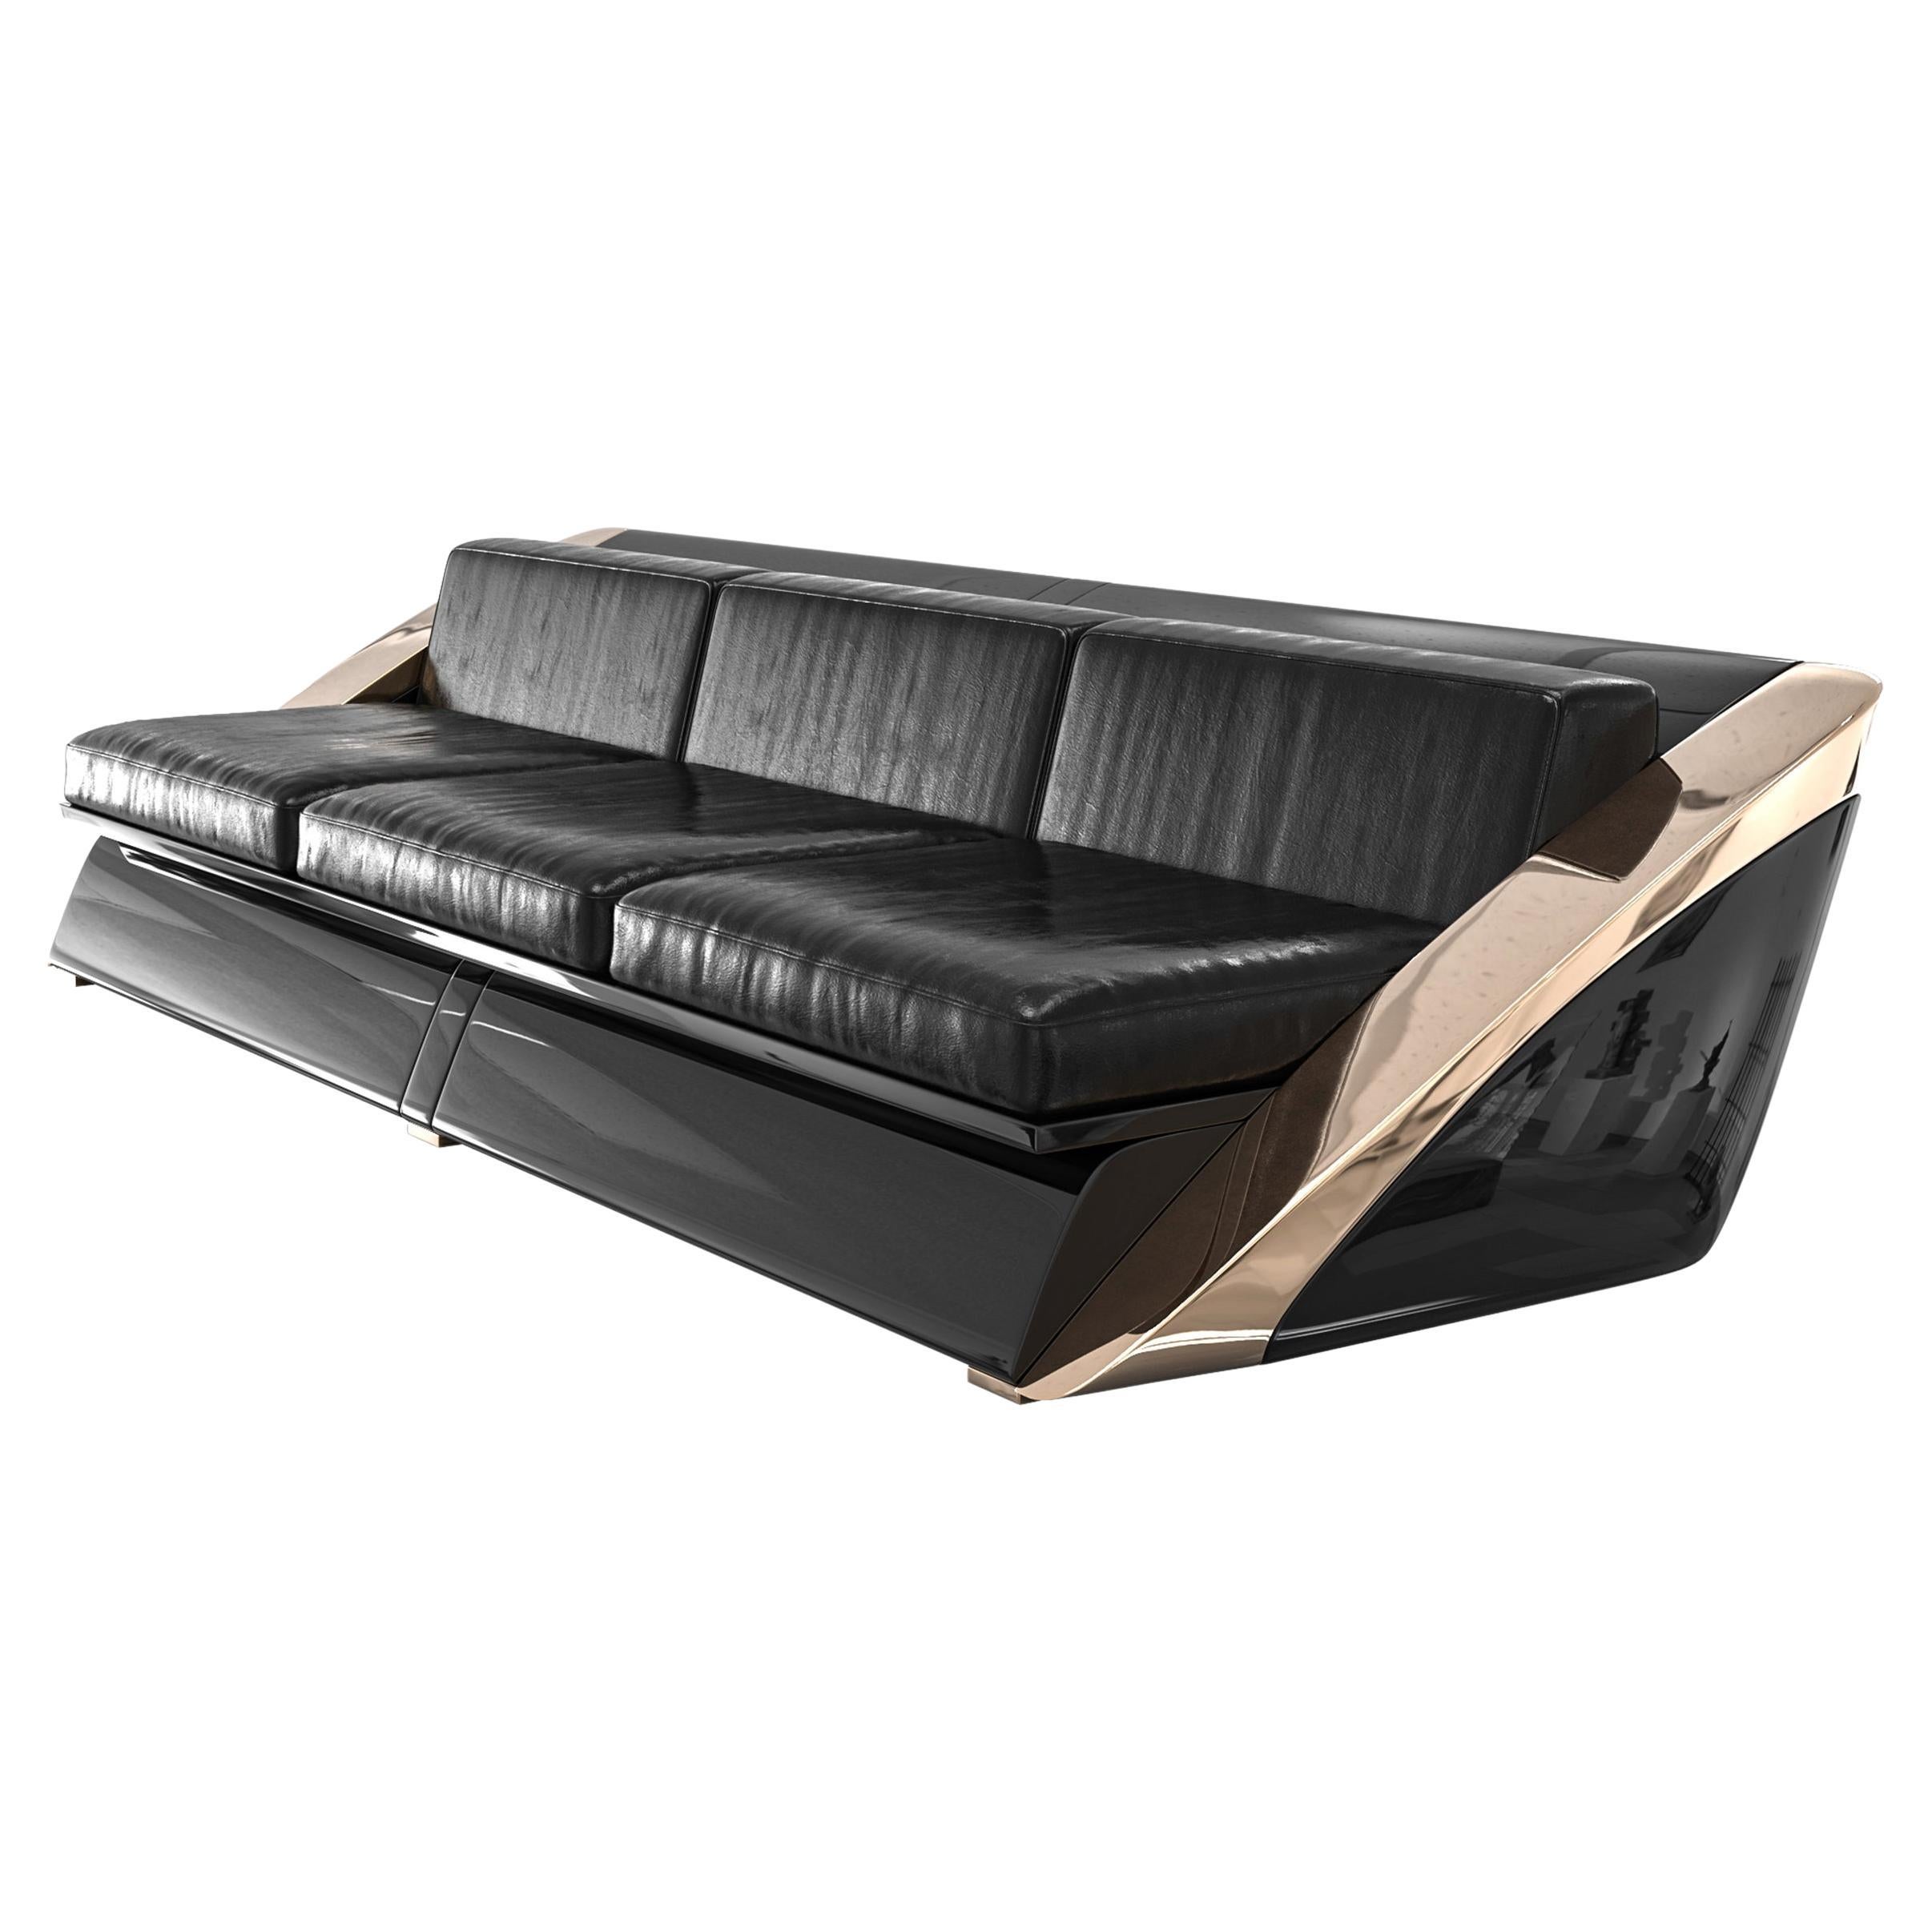 "Galata" Sofa with Bronze, Stainless Steel, Burl Walnut. Hand Crafted, Istanbul For Sale